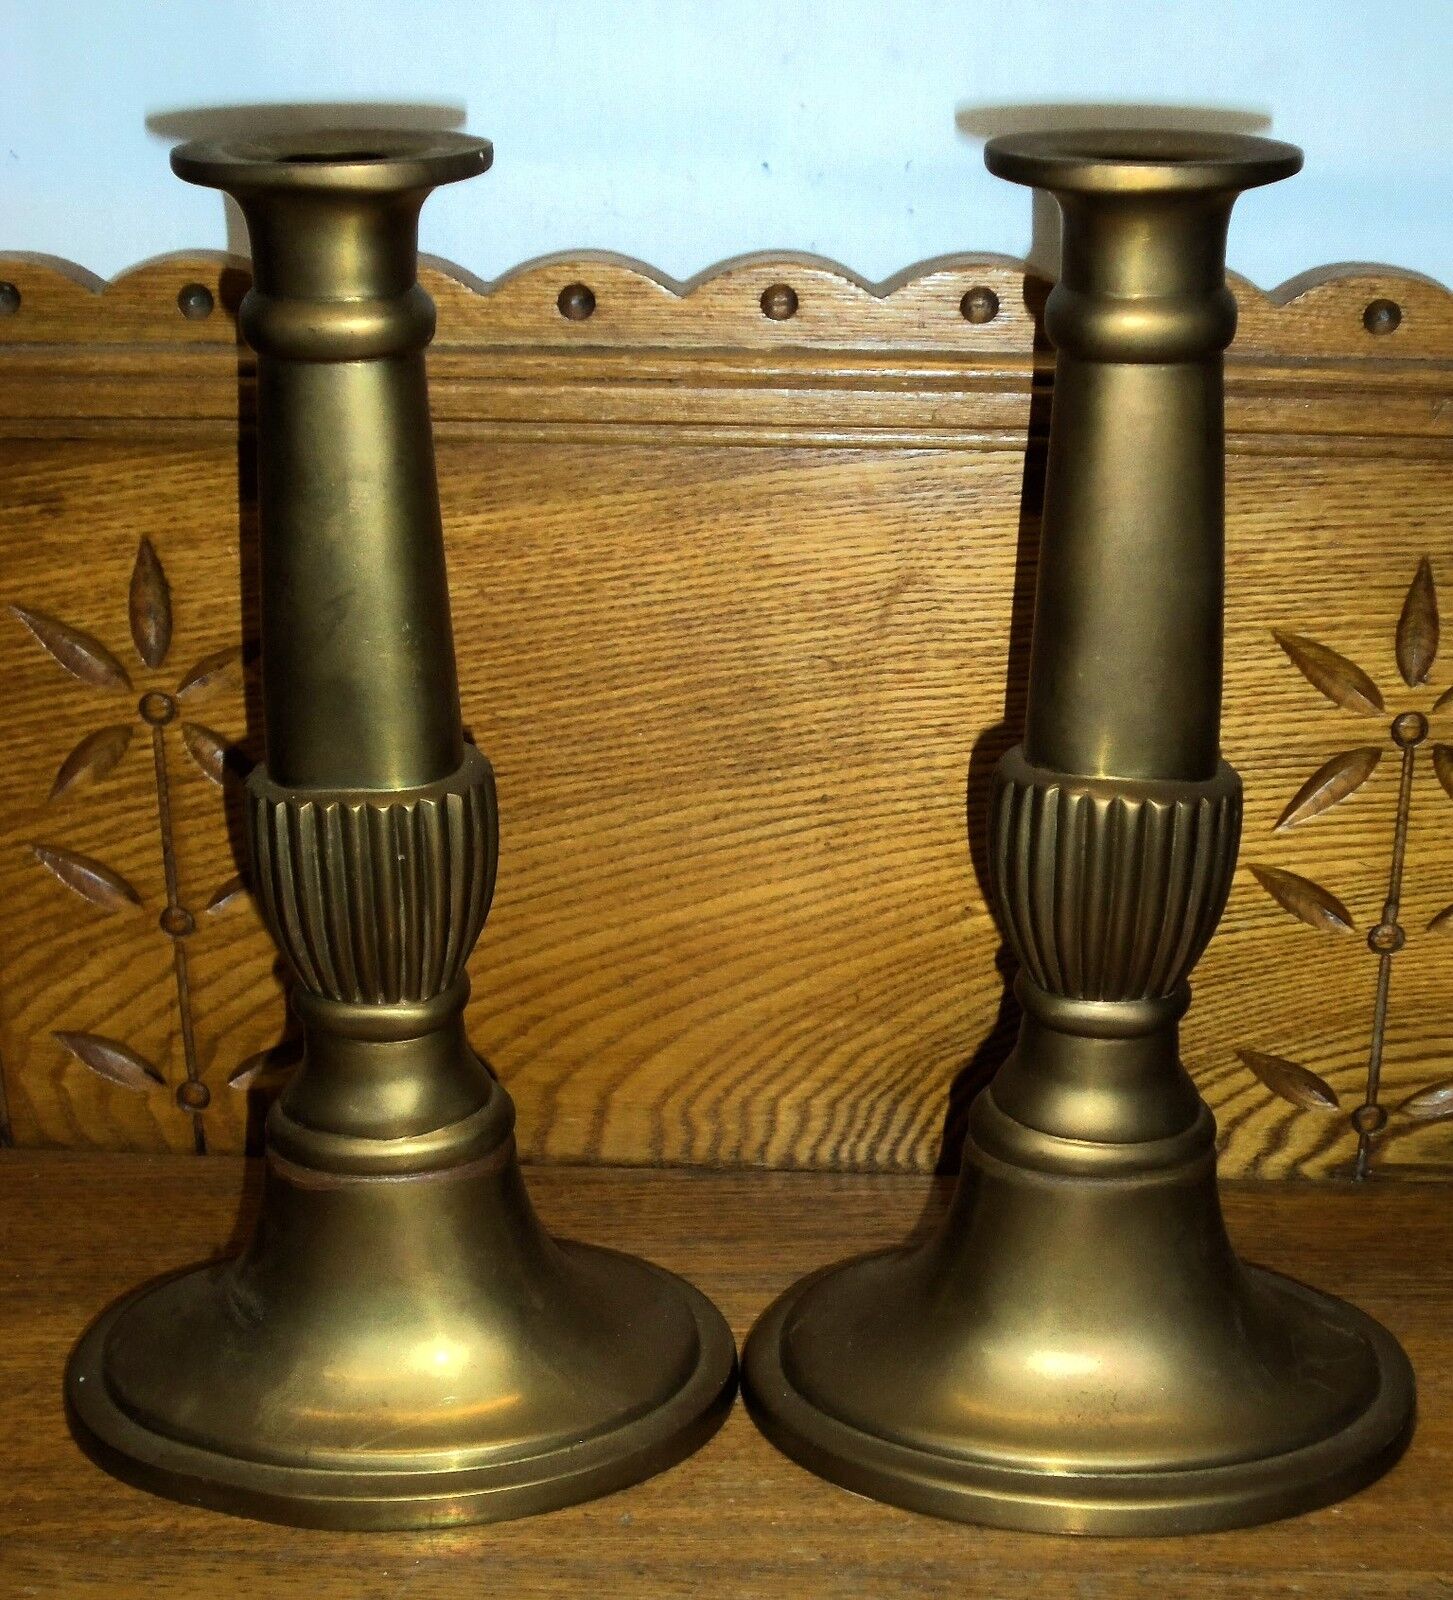 Vintage Pair of Neoclassical Bronze or Brass Candlesticks